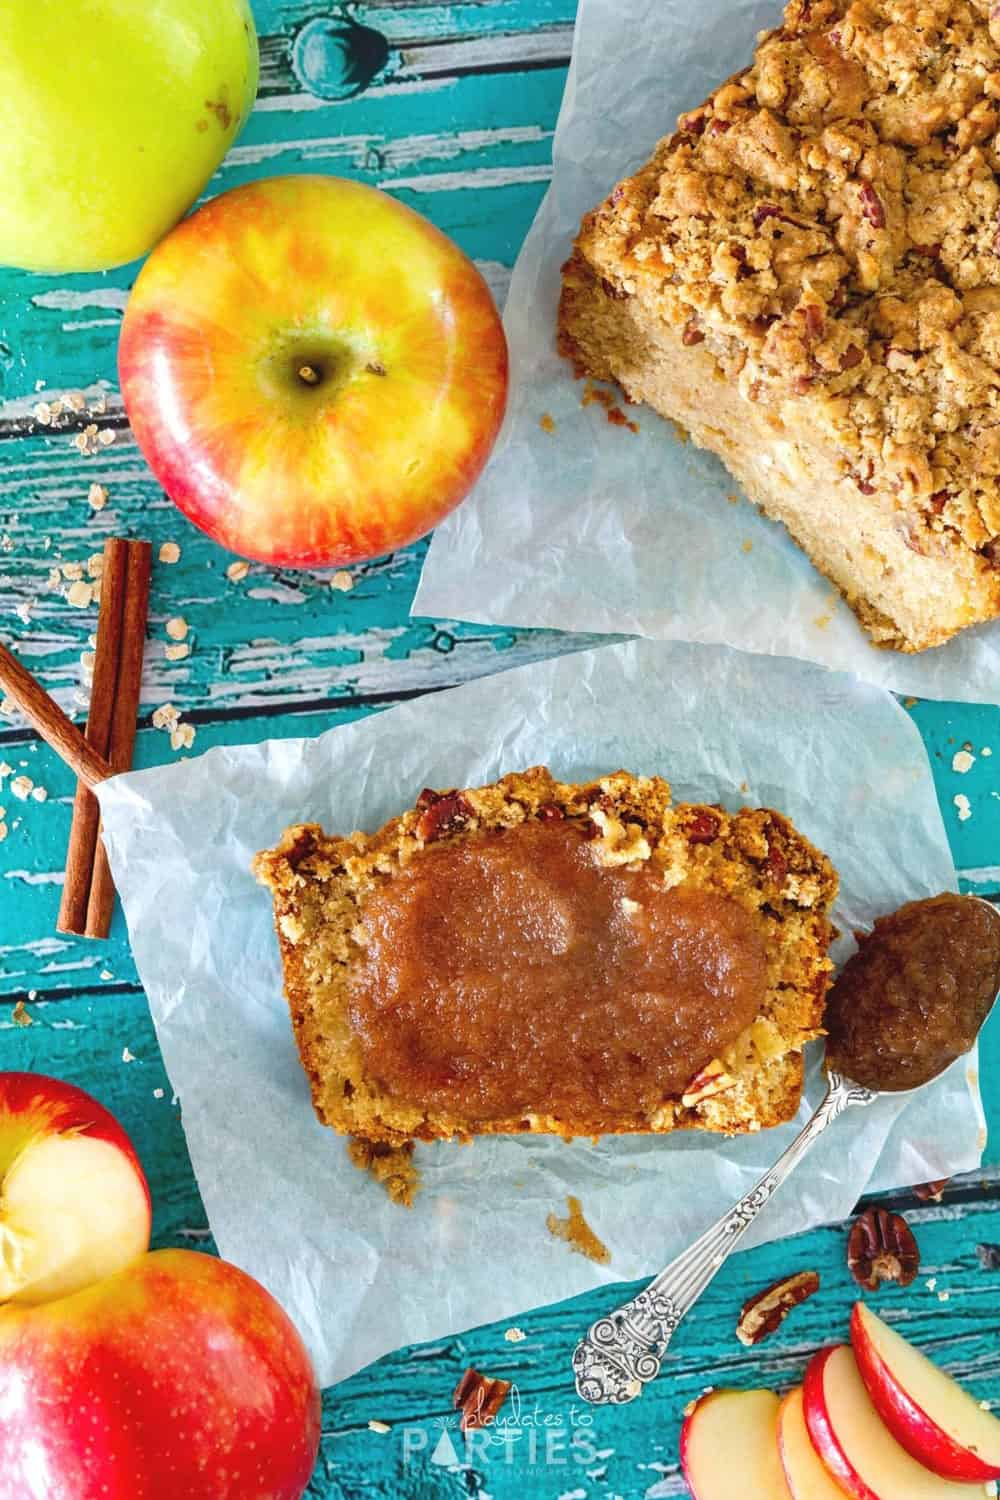 A slice of quick bread with a smear of apple butter on a piece of parchment paper.